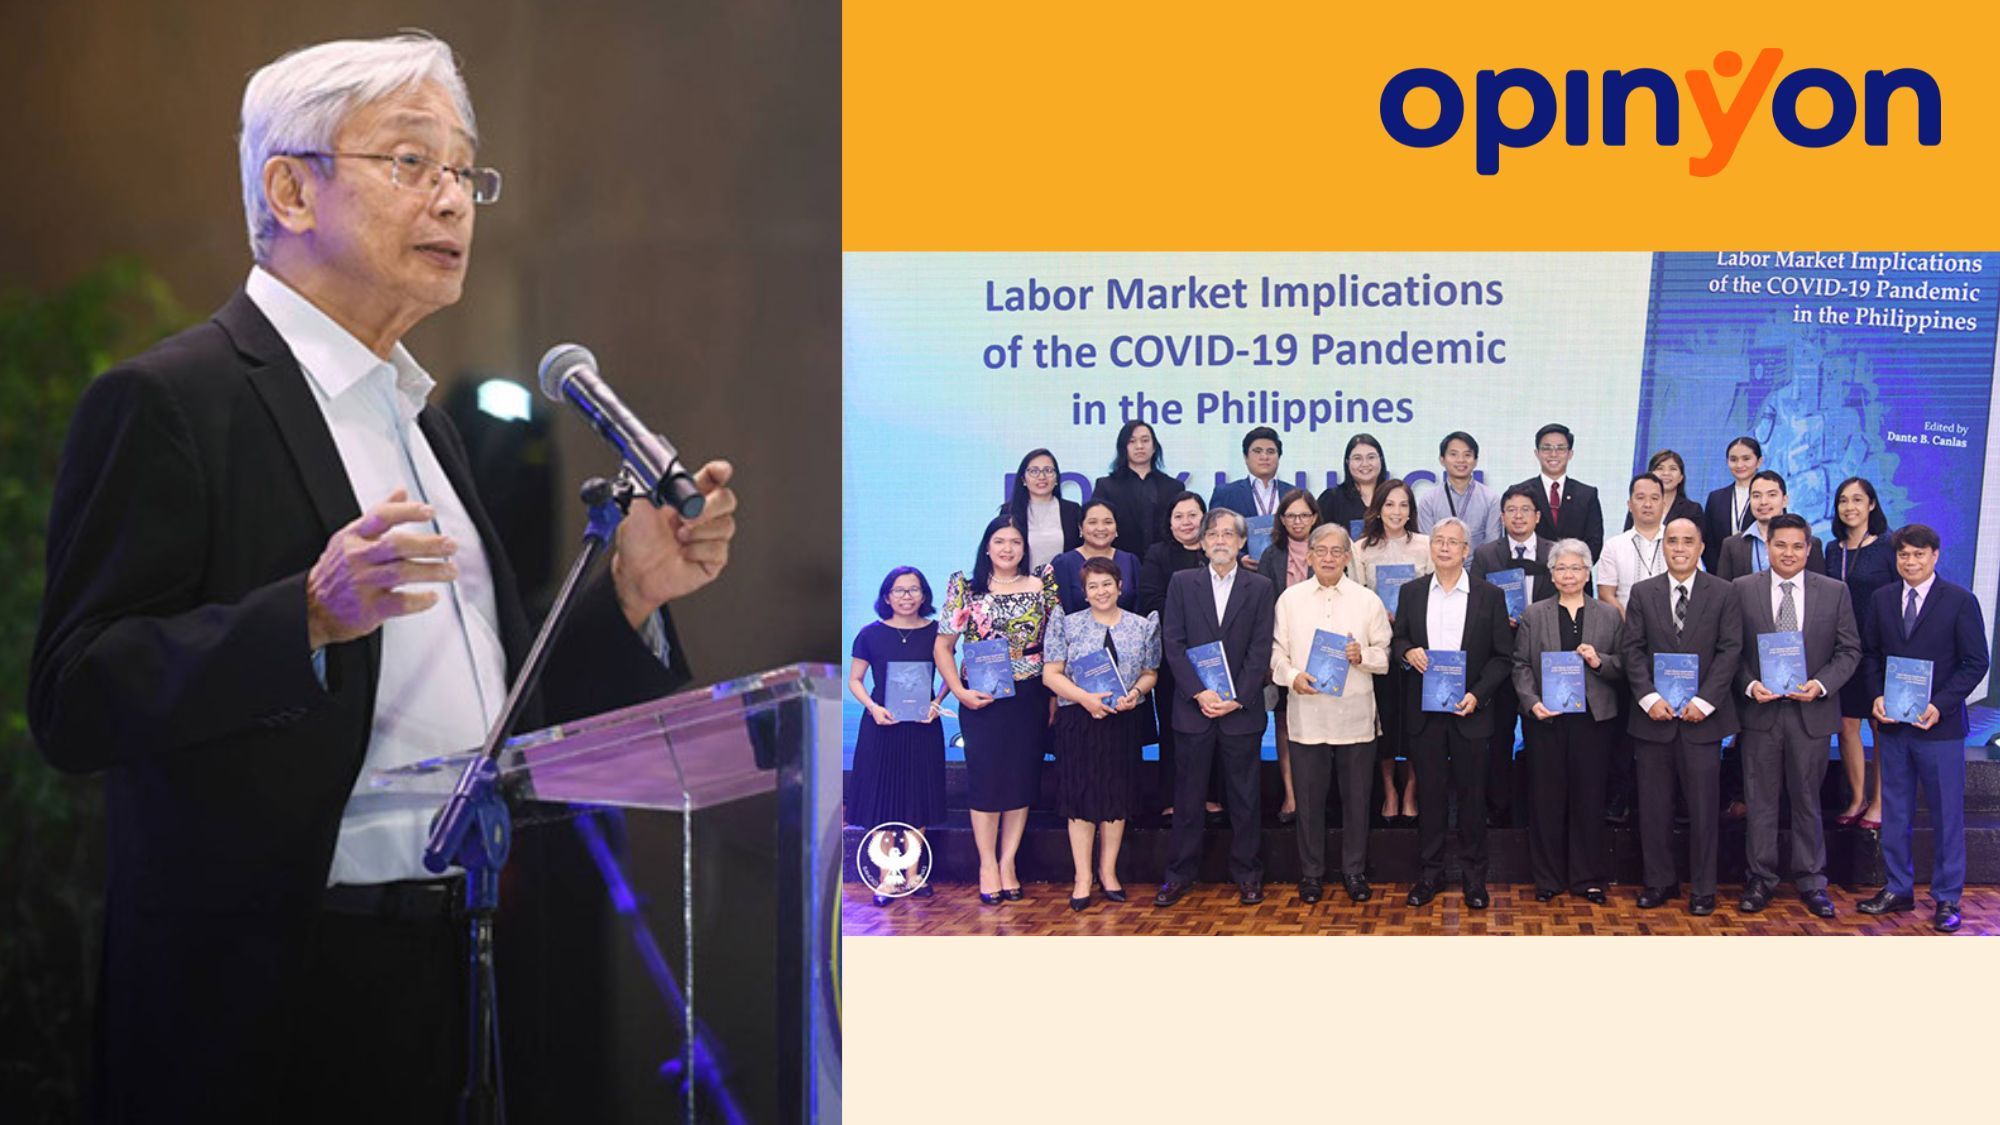 BSP Launches book on covids effects on the labor market